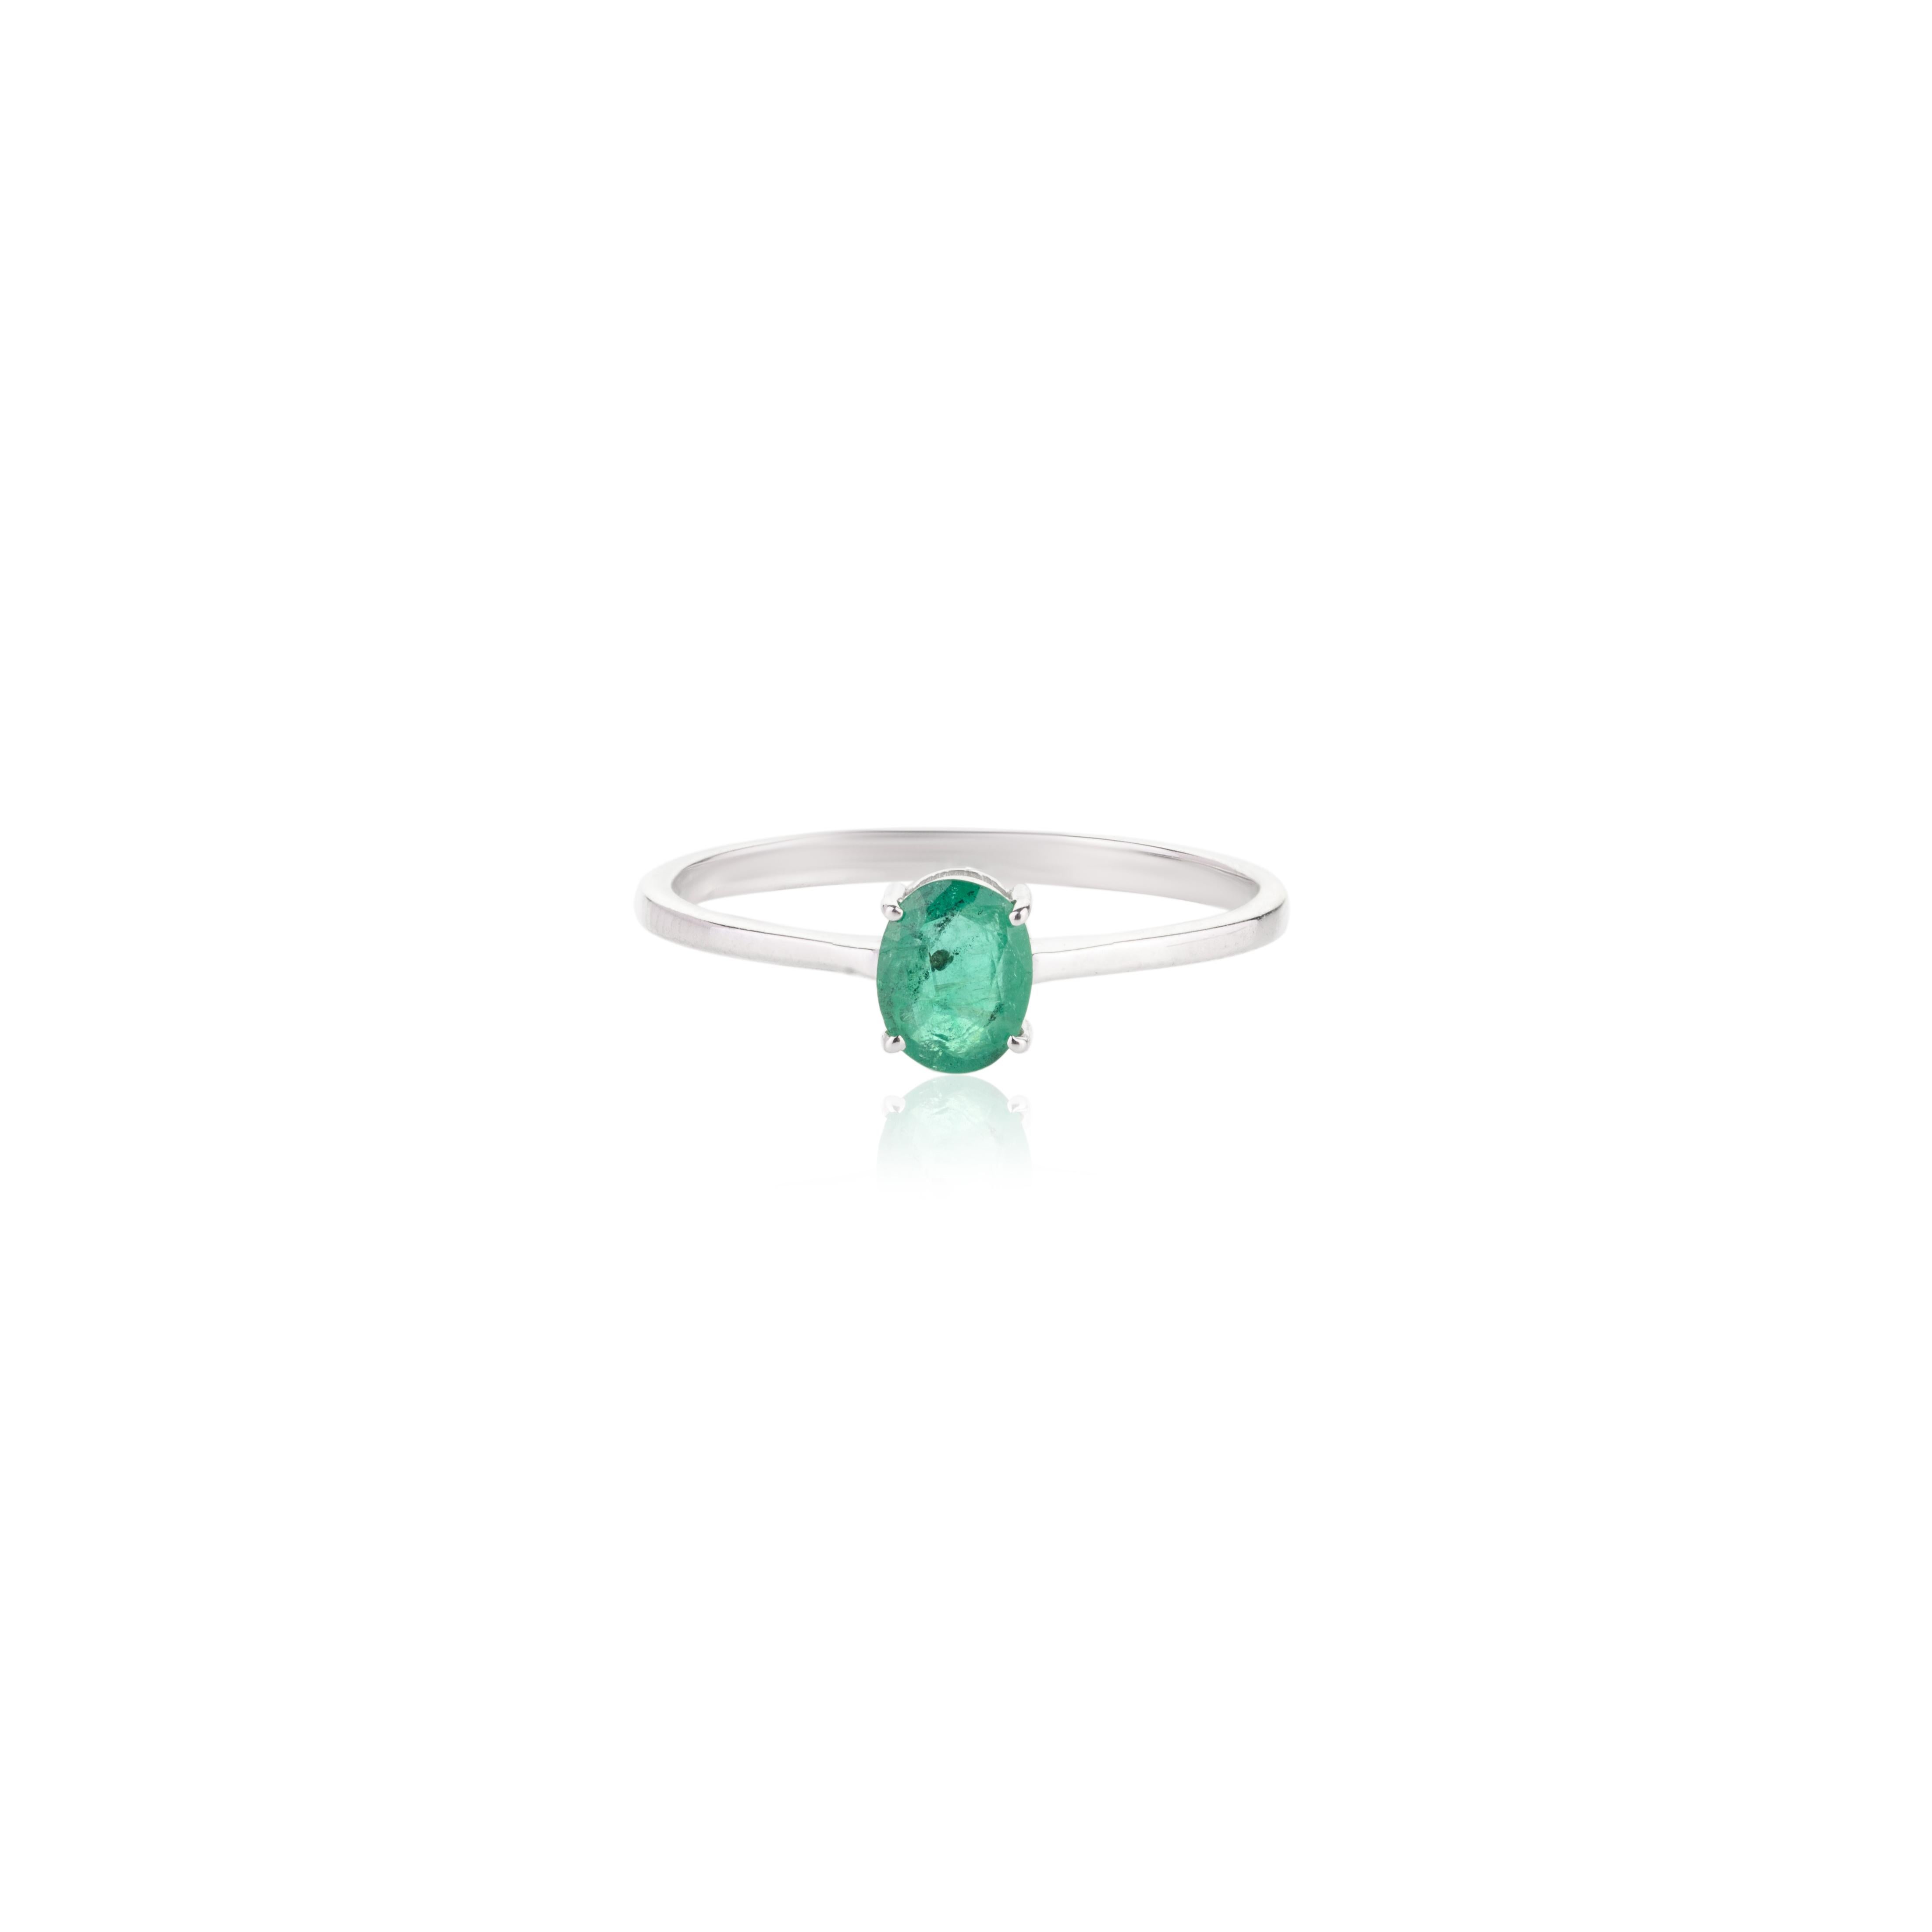 For Sale:  Handmade Natural Emerald Ring 18k Solid White Gold Minimalist Jewelry for Her 4